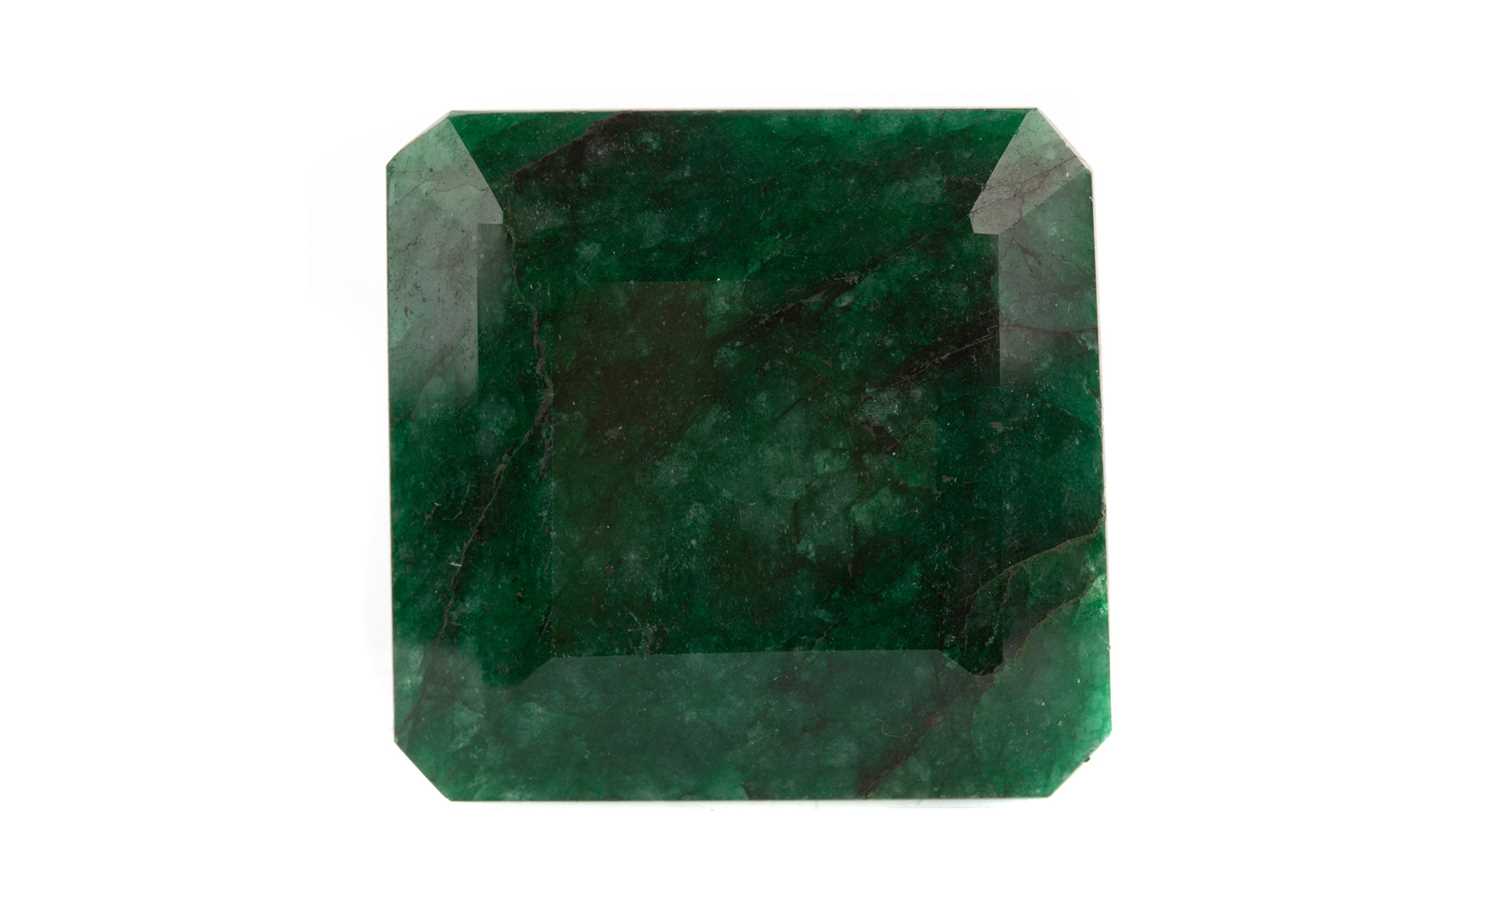 Lot 908 - **A CERTIFICATED UNMOUNTED EMERALD